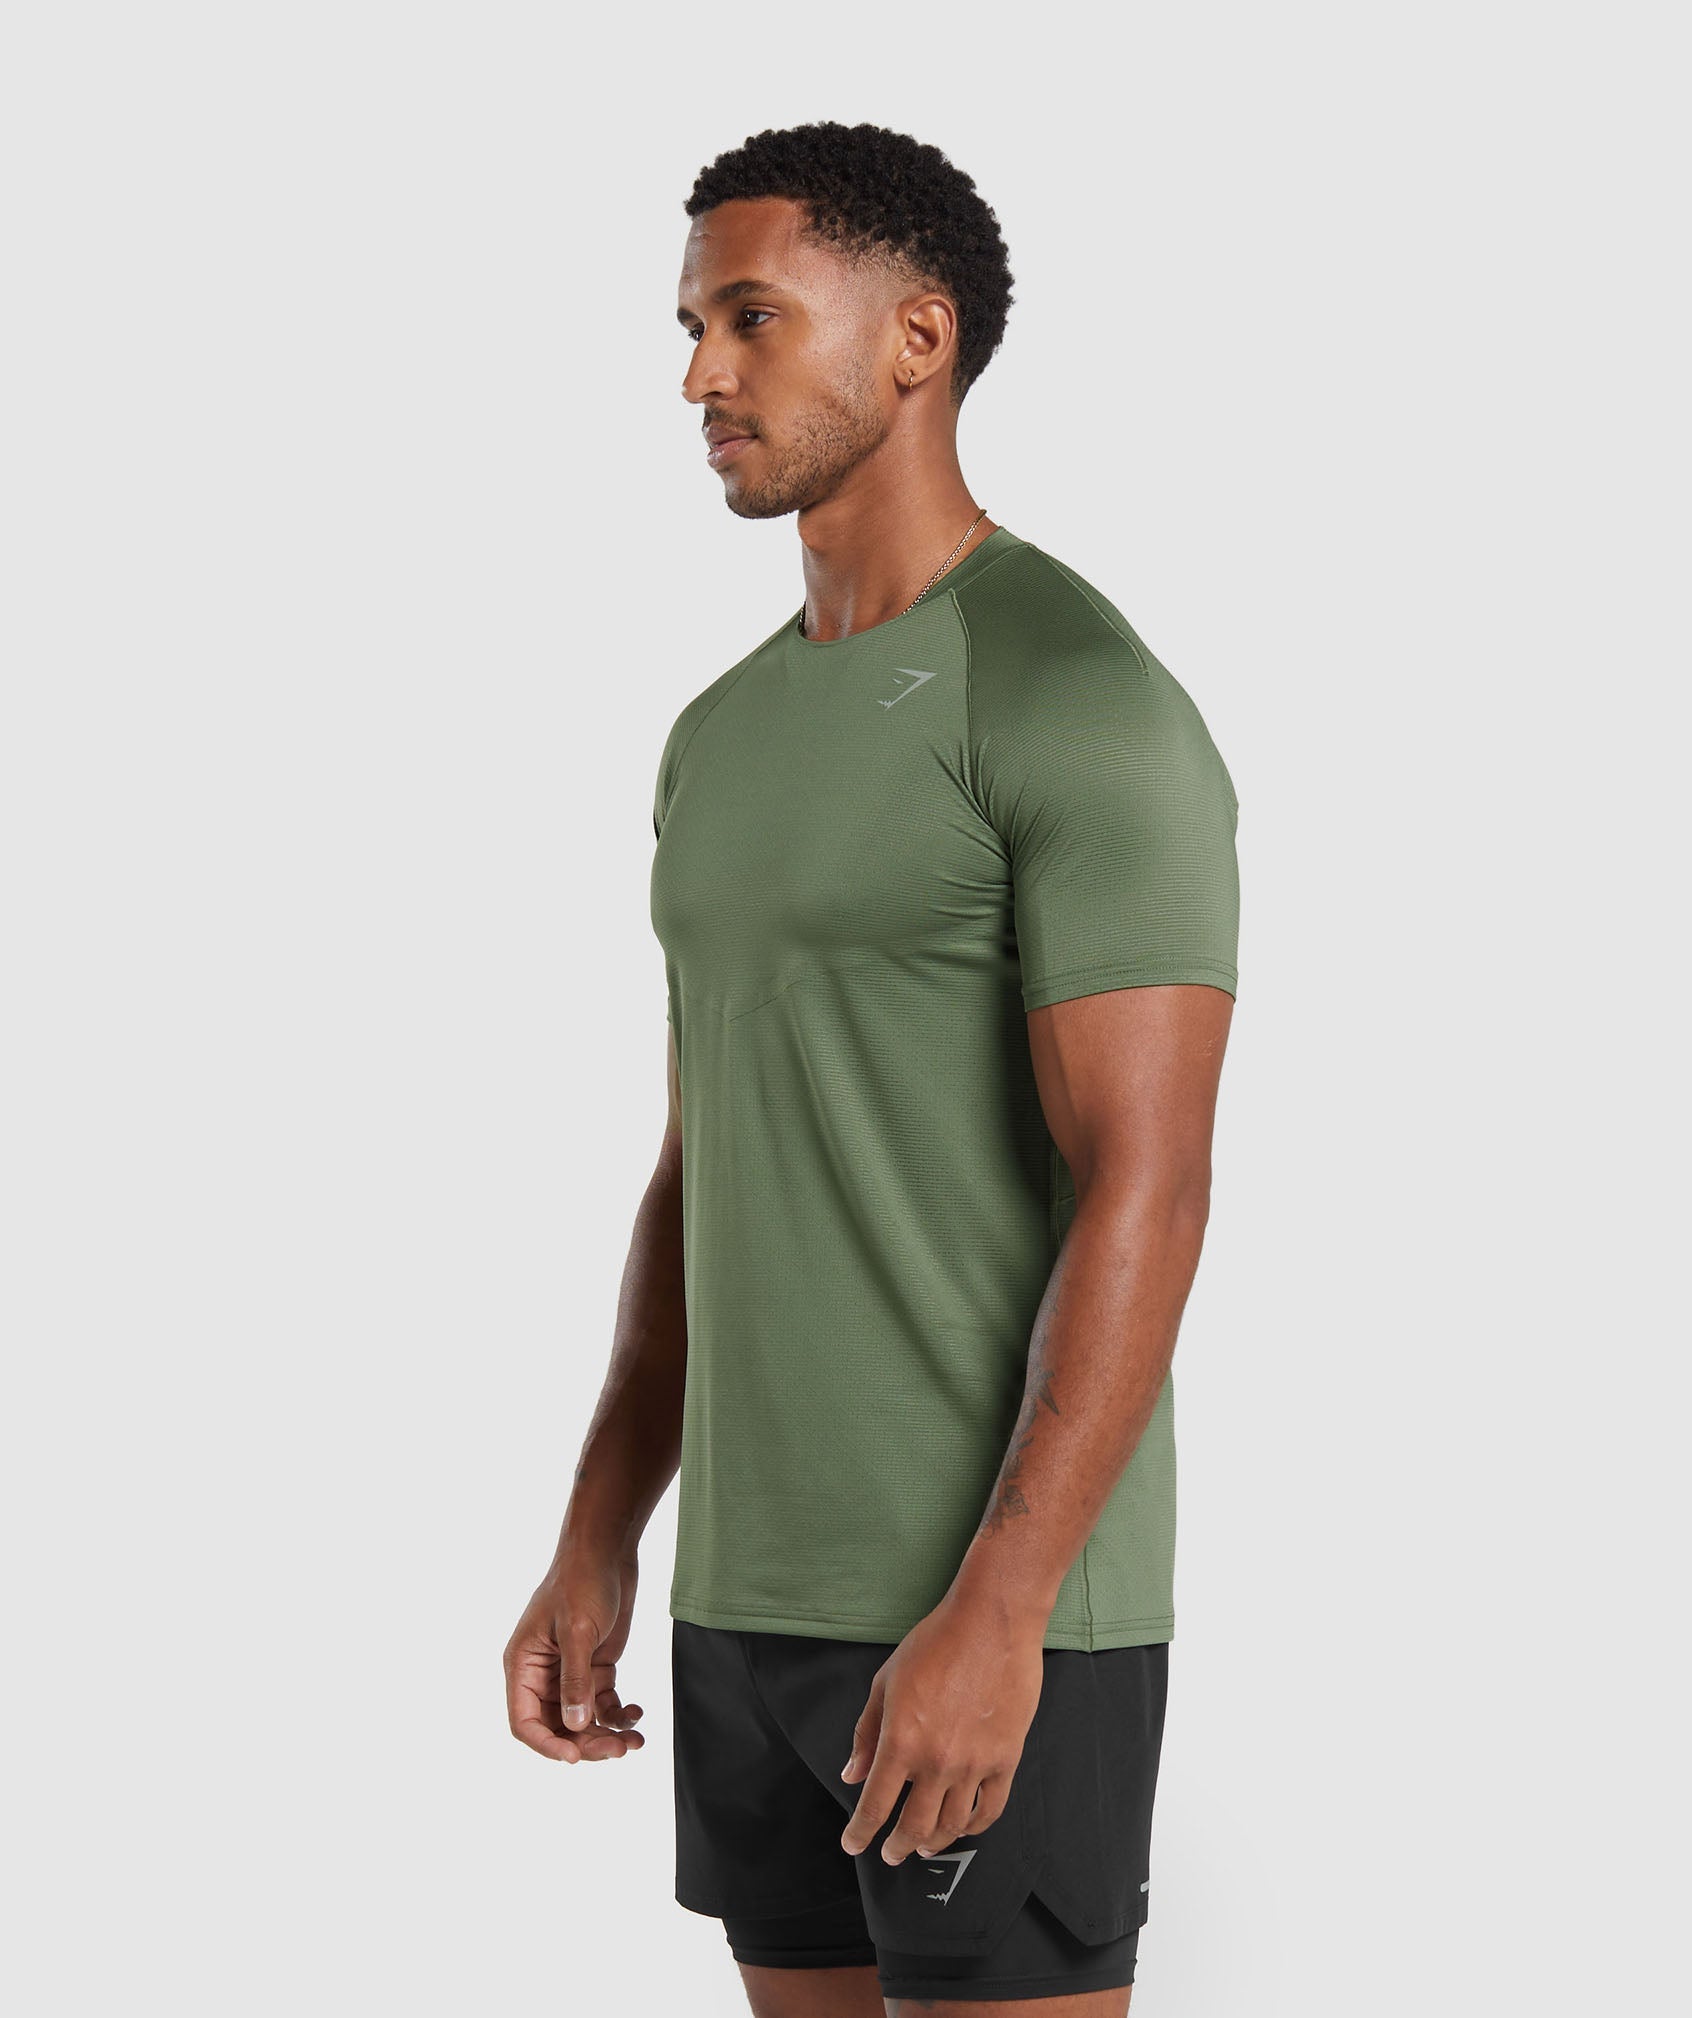 Speed T-Shirt in Core Olive - view 3